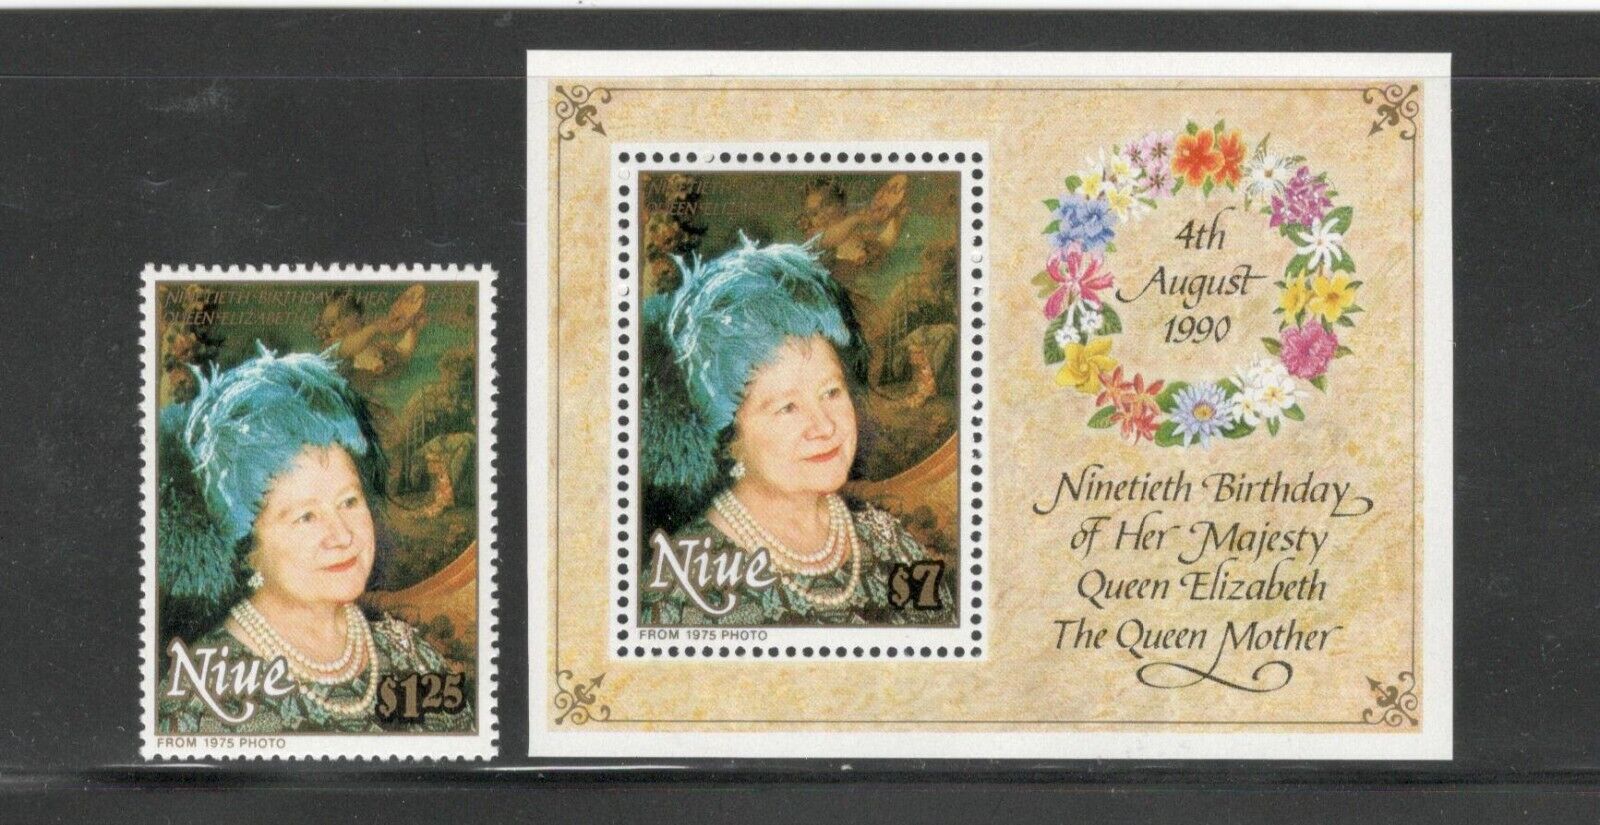 Niue - Queen Mother, 90th Birthday - Set #587-8 - Mnh - Yr 1990